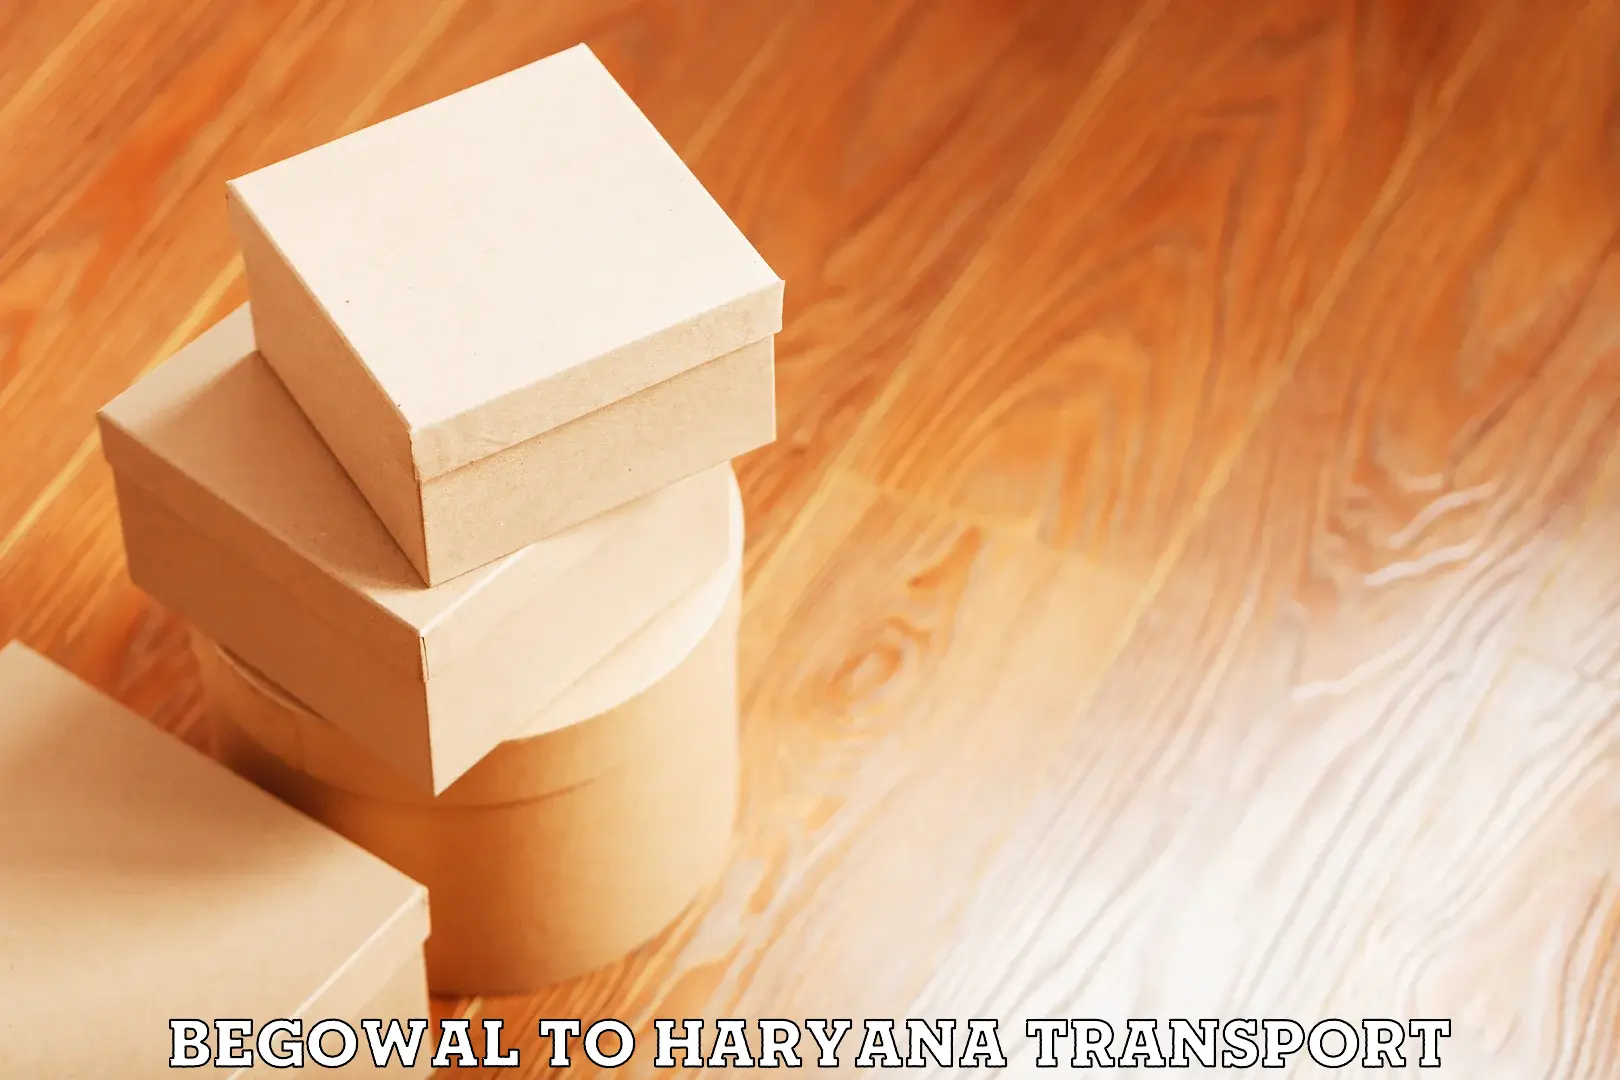 Nearby transport service Begowal to Haryana